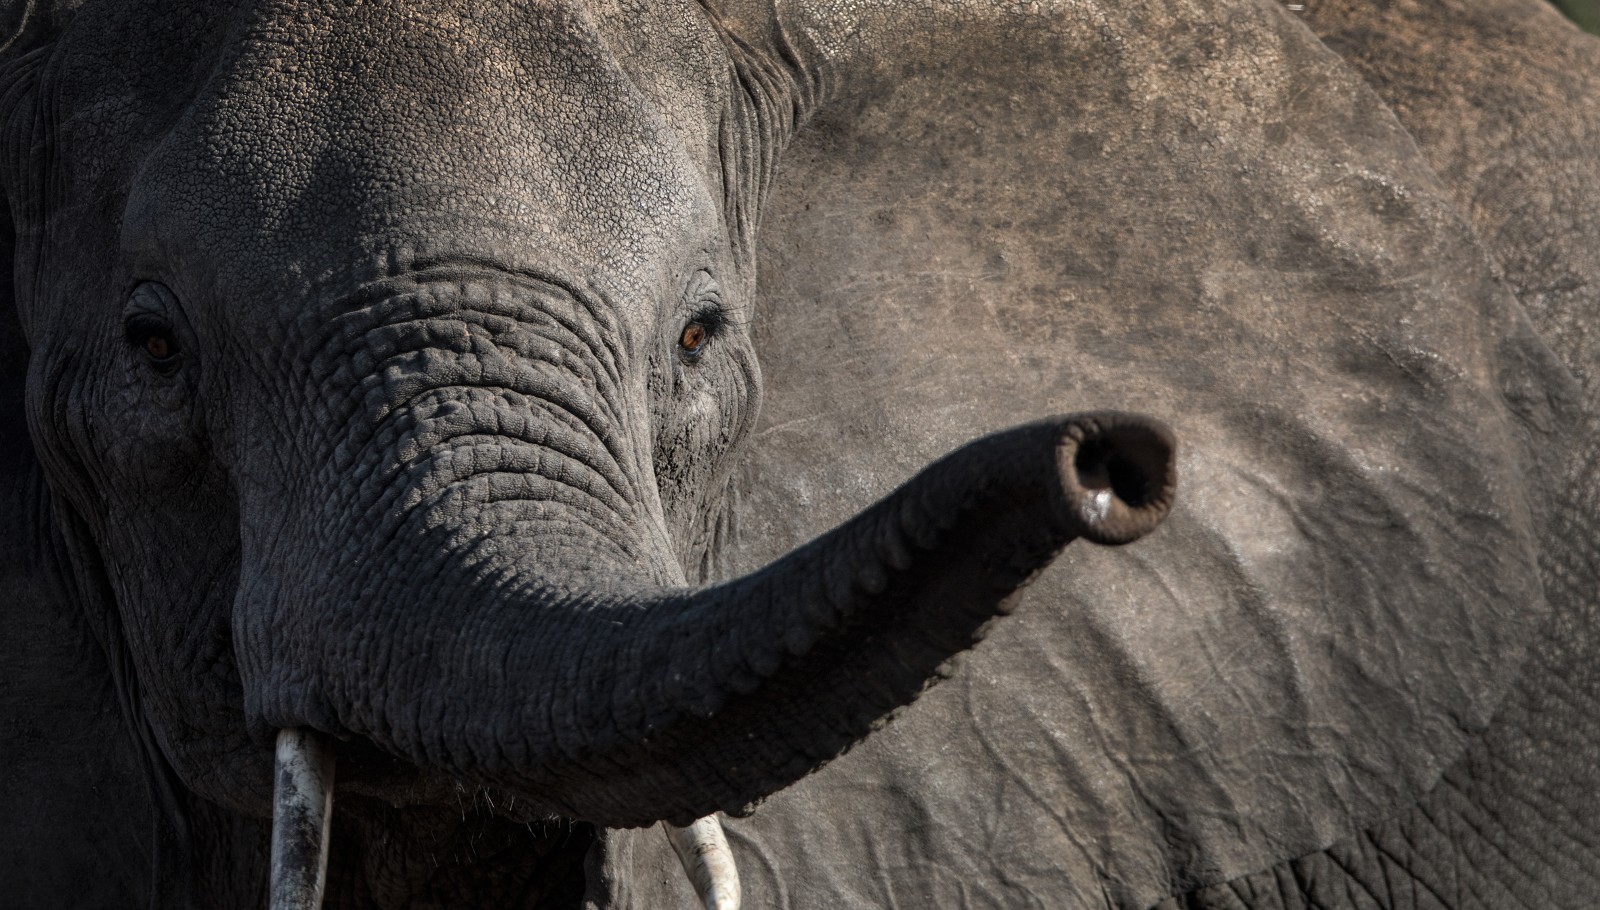 A close-up photo of an elephant's face with trunk raised